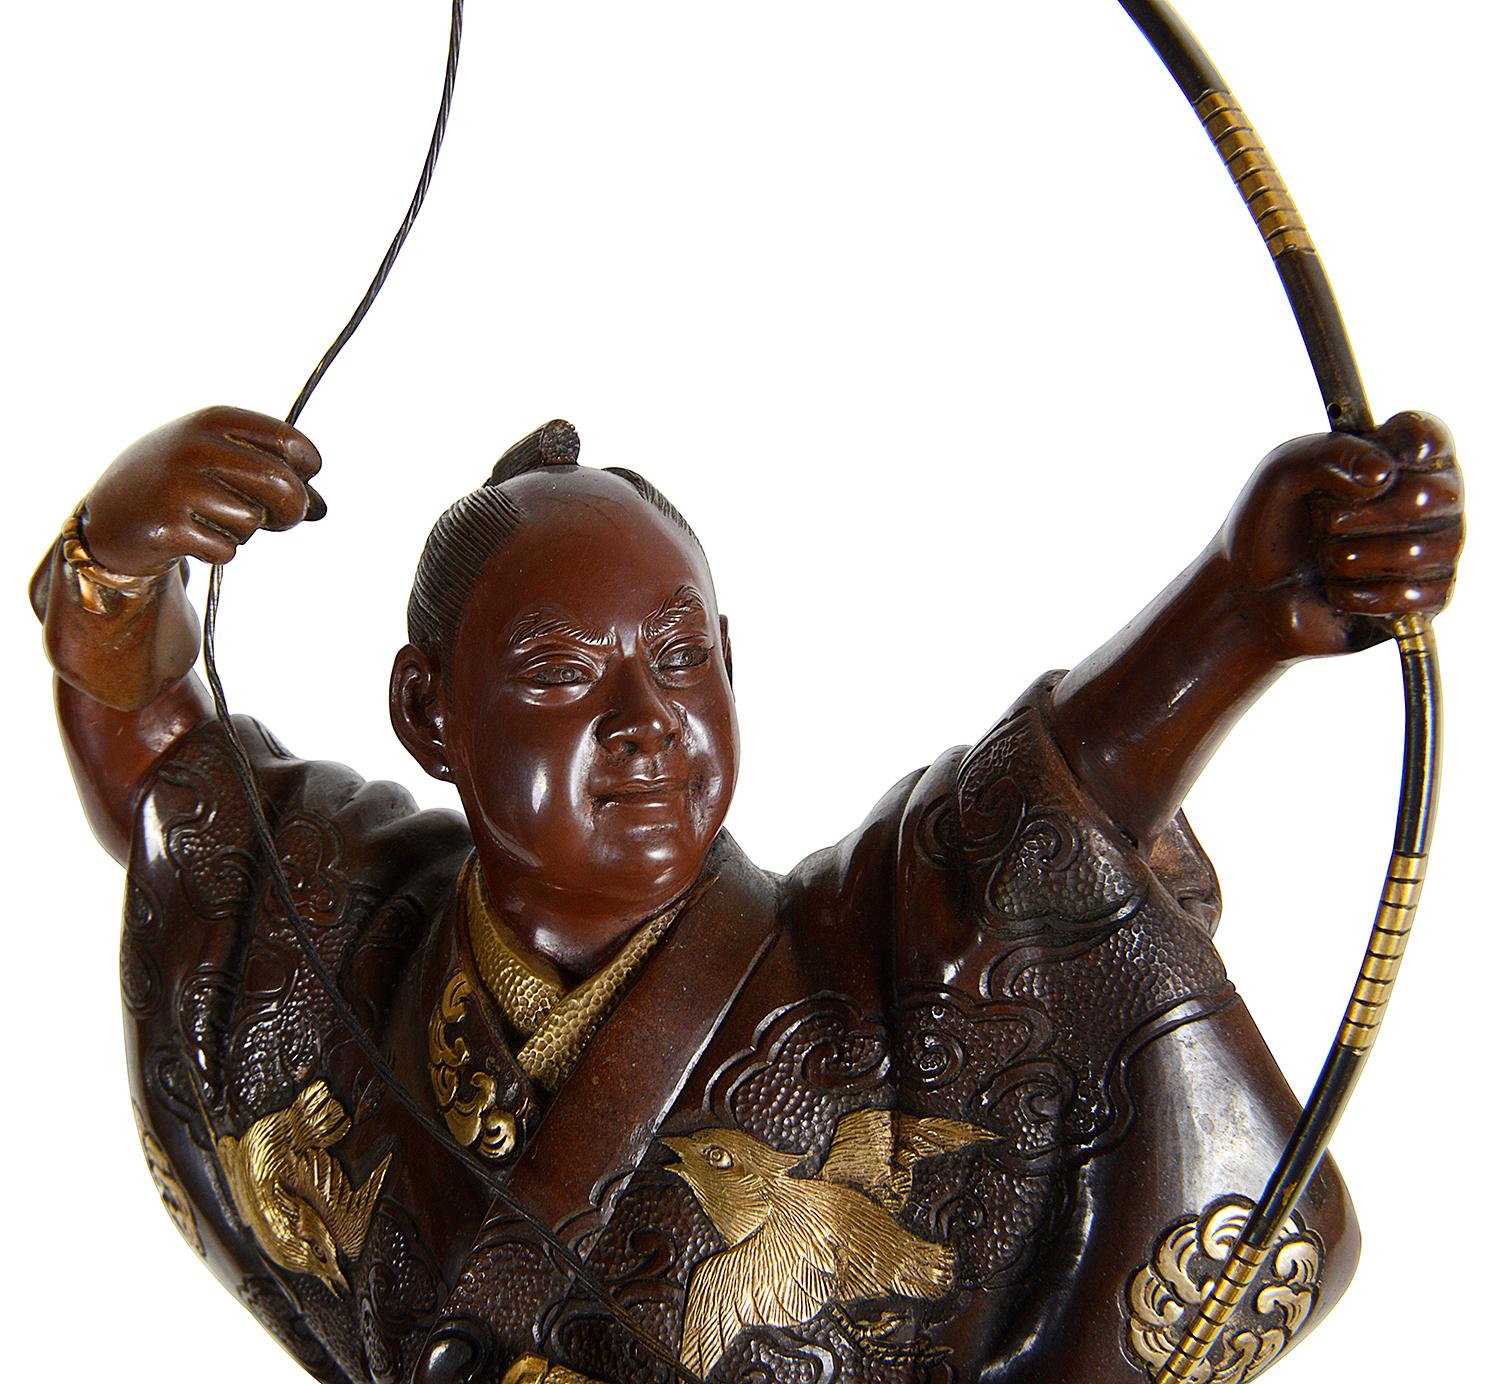 A fine quality Meiji period (1868-1912) Japanese patinated bronze statue of an archer, having gilded highlights, raised o a carved wood and gilded stand.
In the style of Miyao.